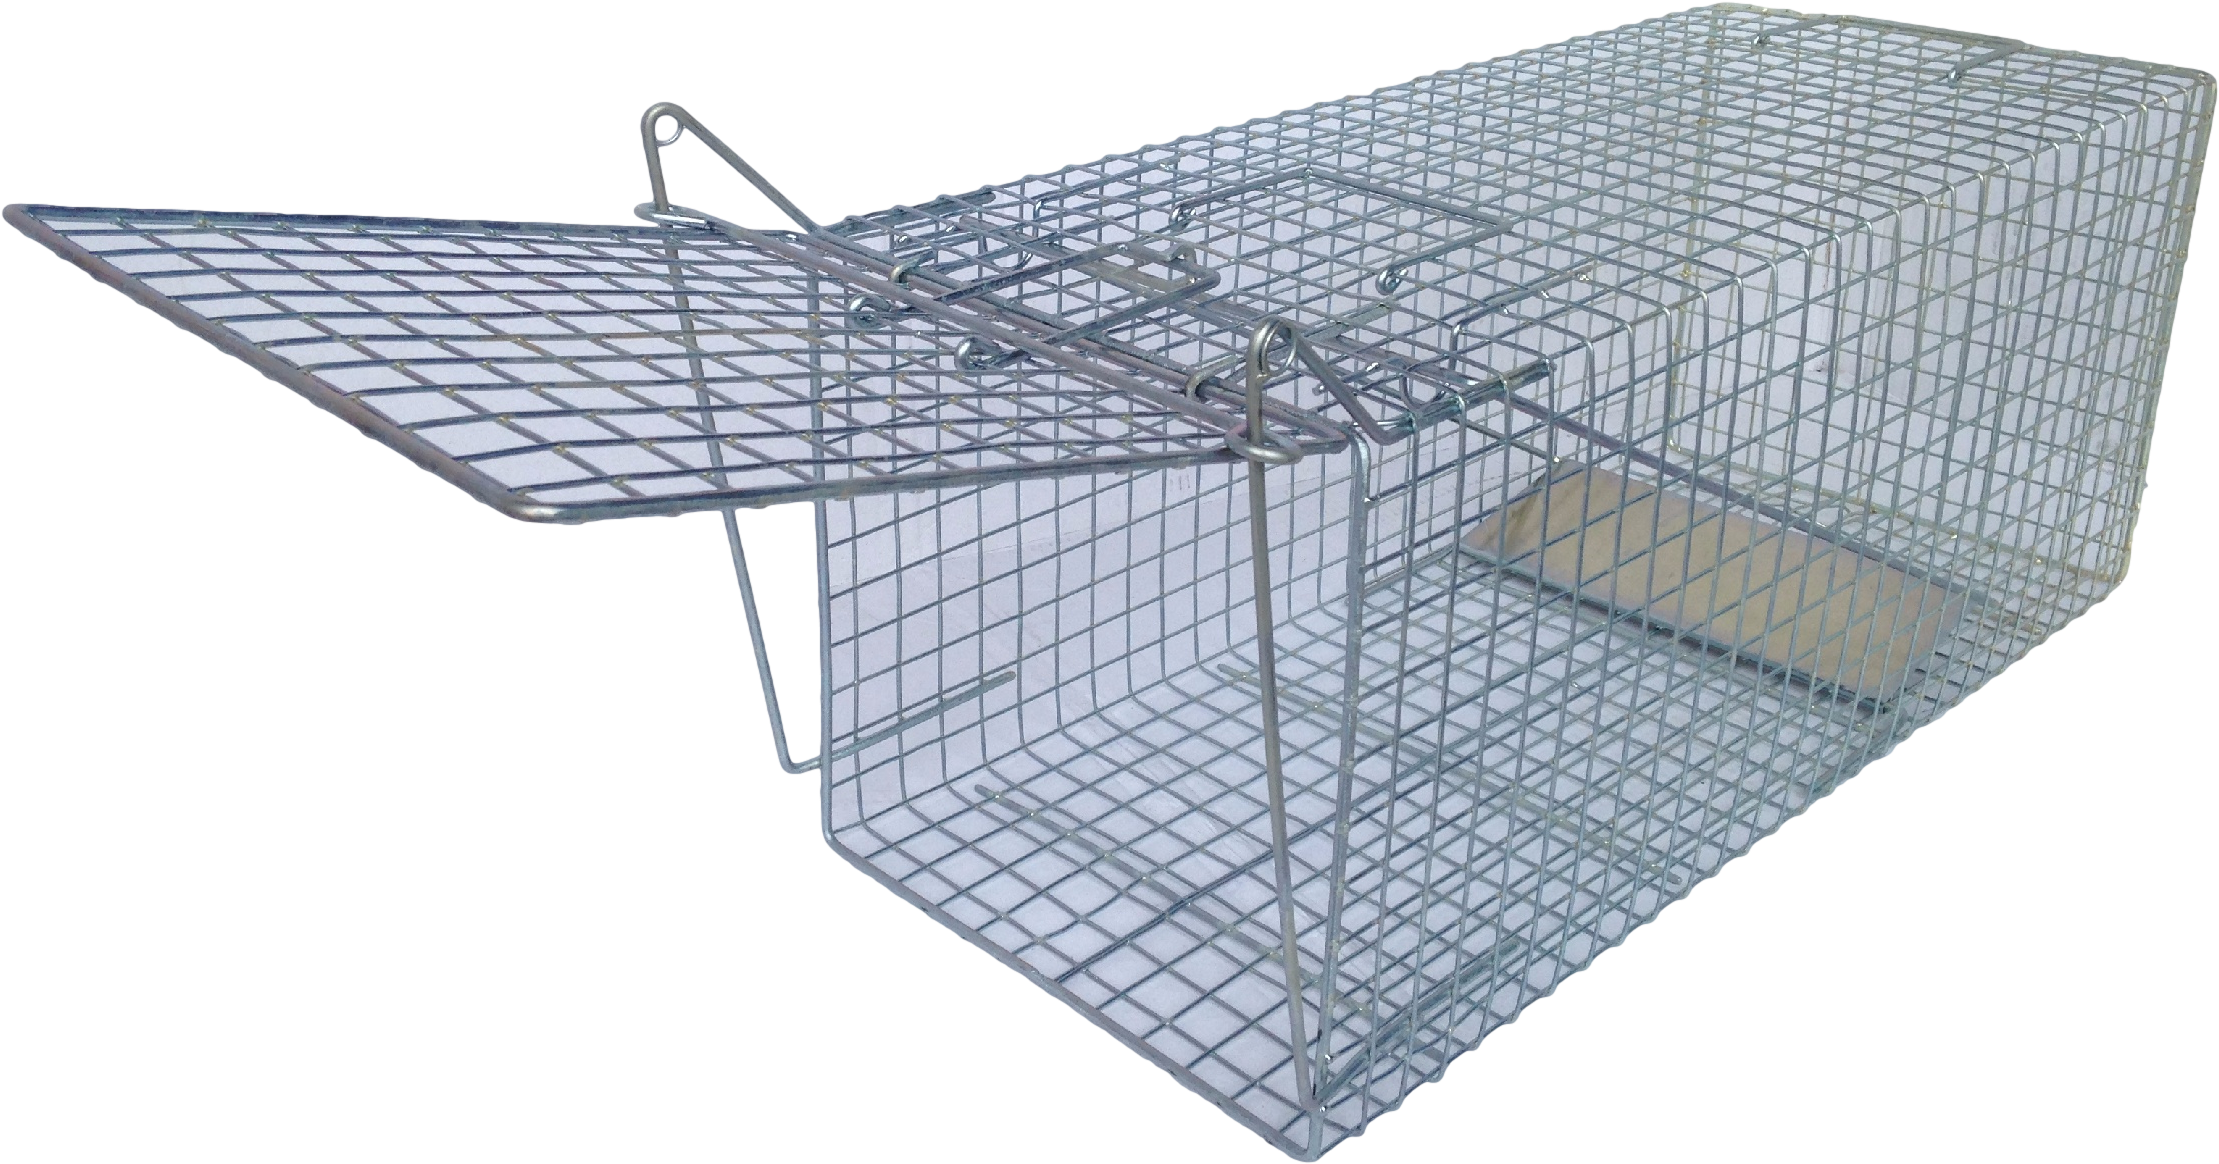 A Metal Cage With A Trap Door